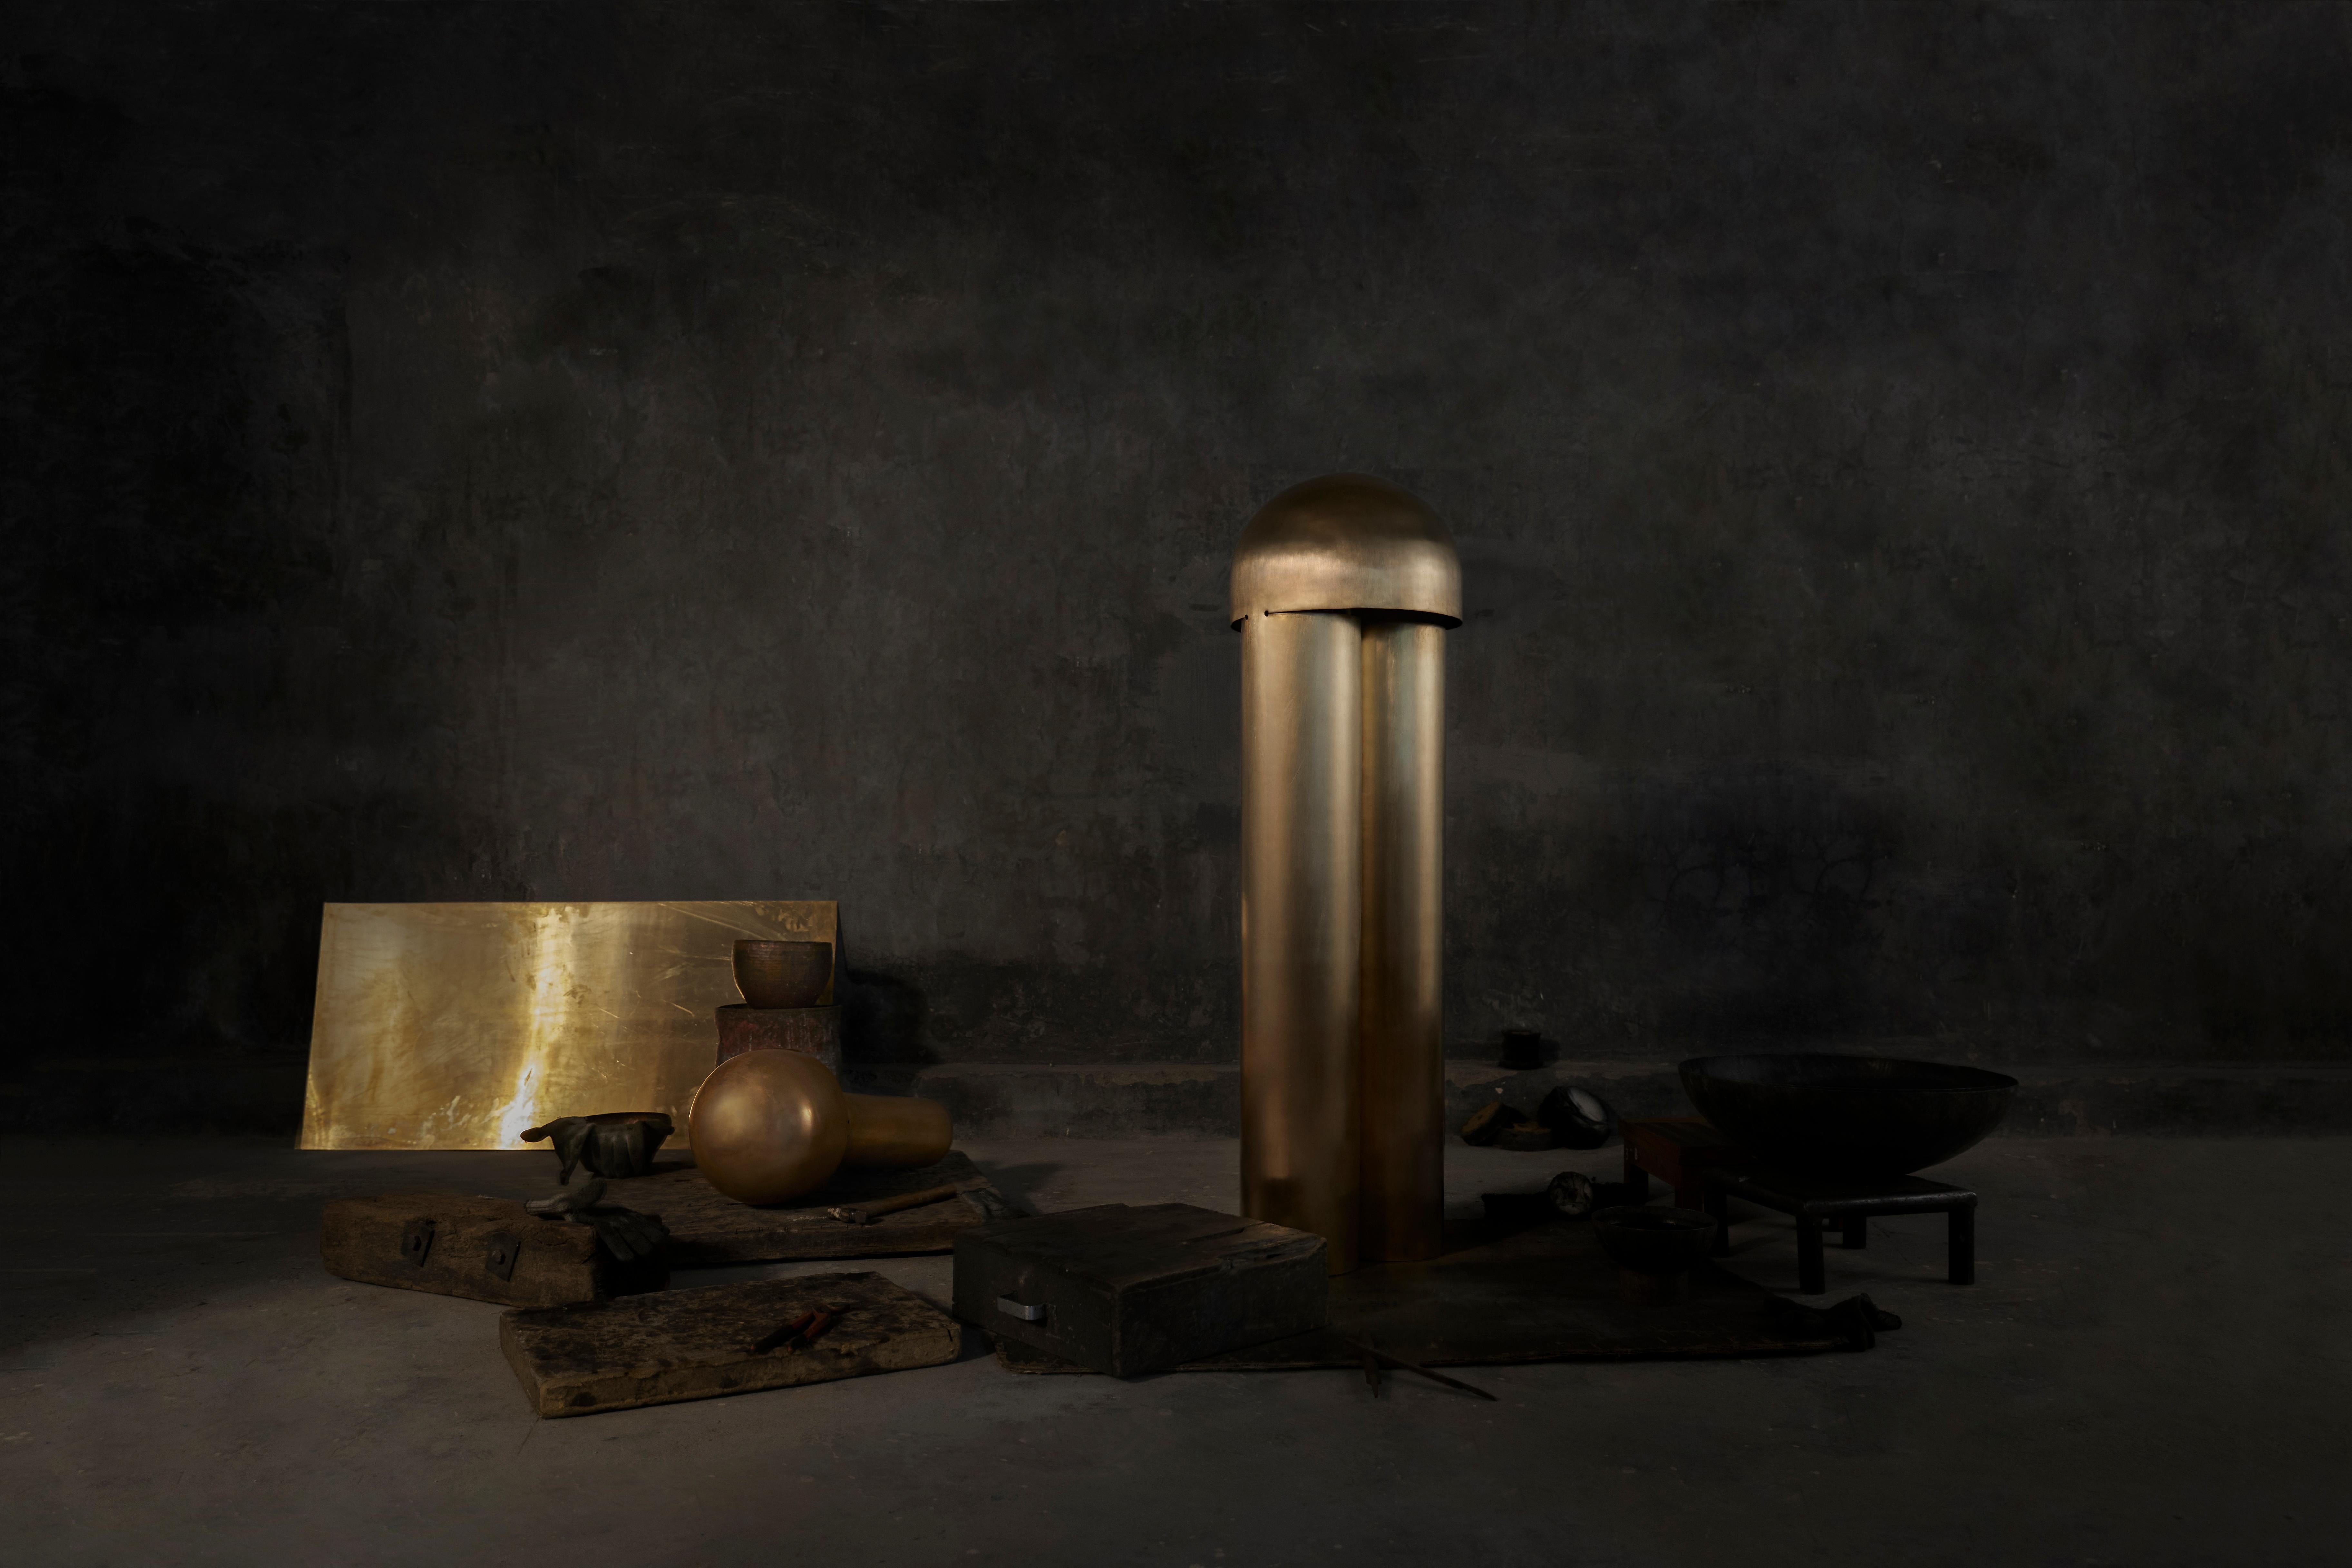 Monolith brass sculpted table lamp by Paul matter
Dimensions: H 419 mm x D 203.2 mm
Weight: 3 Kgs
Lamping: 1 type E14 base, 3W - 5W led, warm white
CE certified, voltage 220V - 240V
Dimmable upon request
Materials: Brass

Custom finishes:
1. Aged